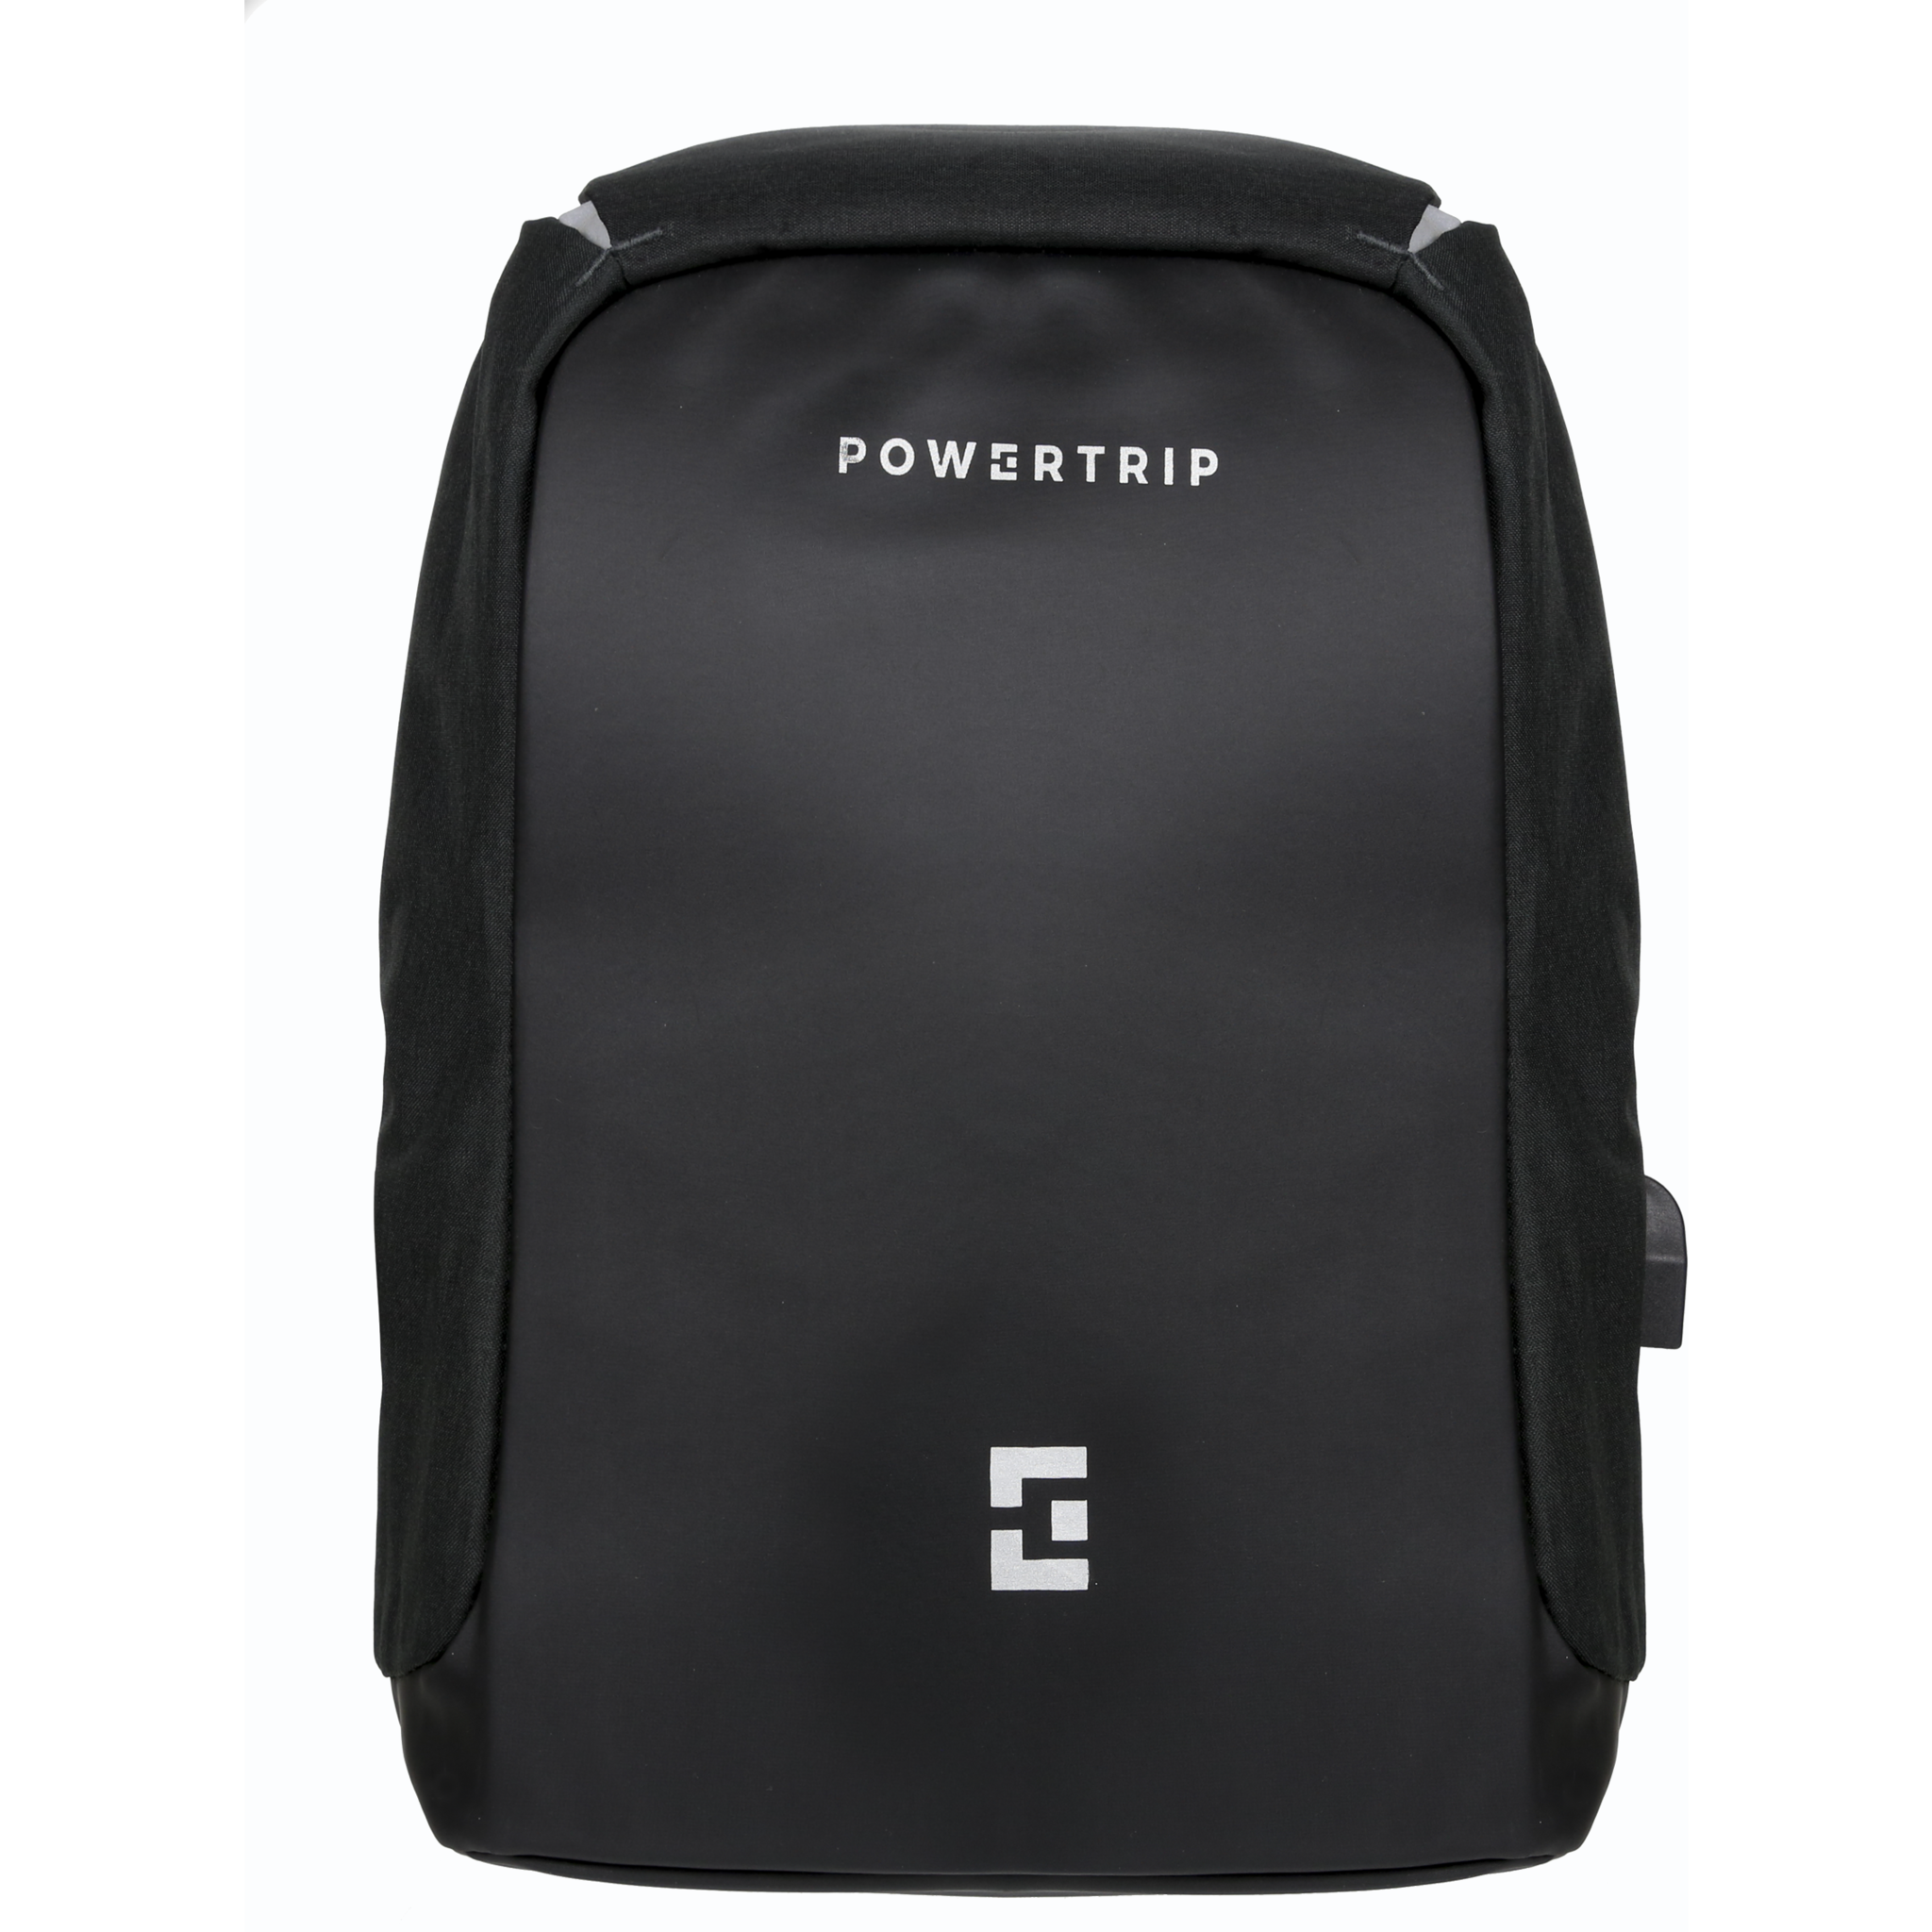 Powertrip Smart Backpack With 10,000mAh Powerbank, GPS And Water Bottle